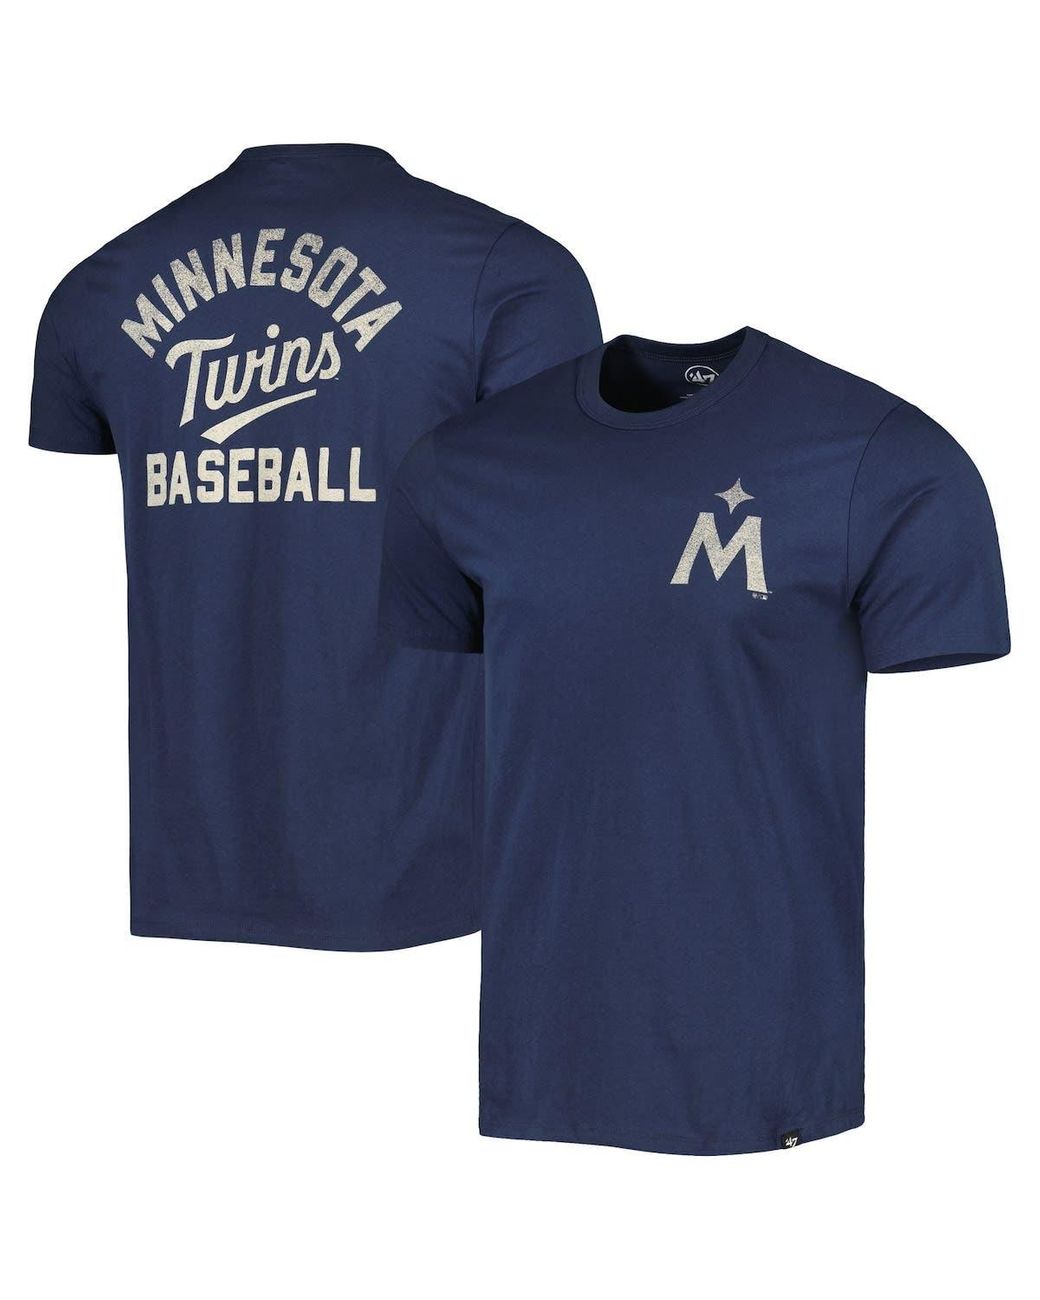 Tampa Bay Rays '47 Winger Franklin Tank Top - Navy